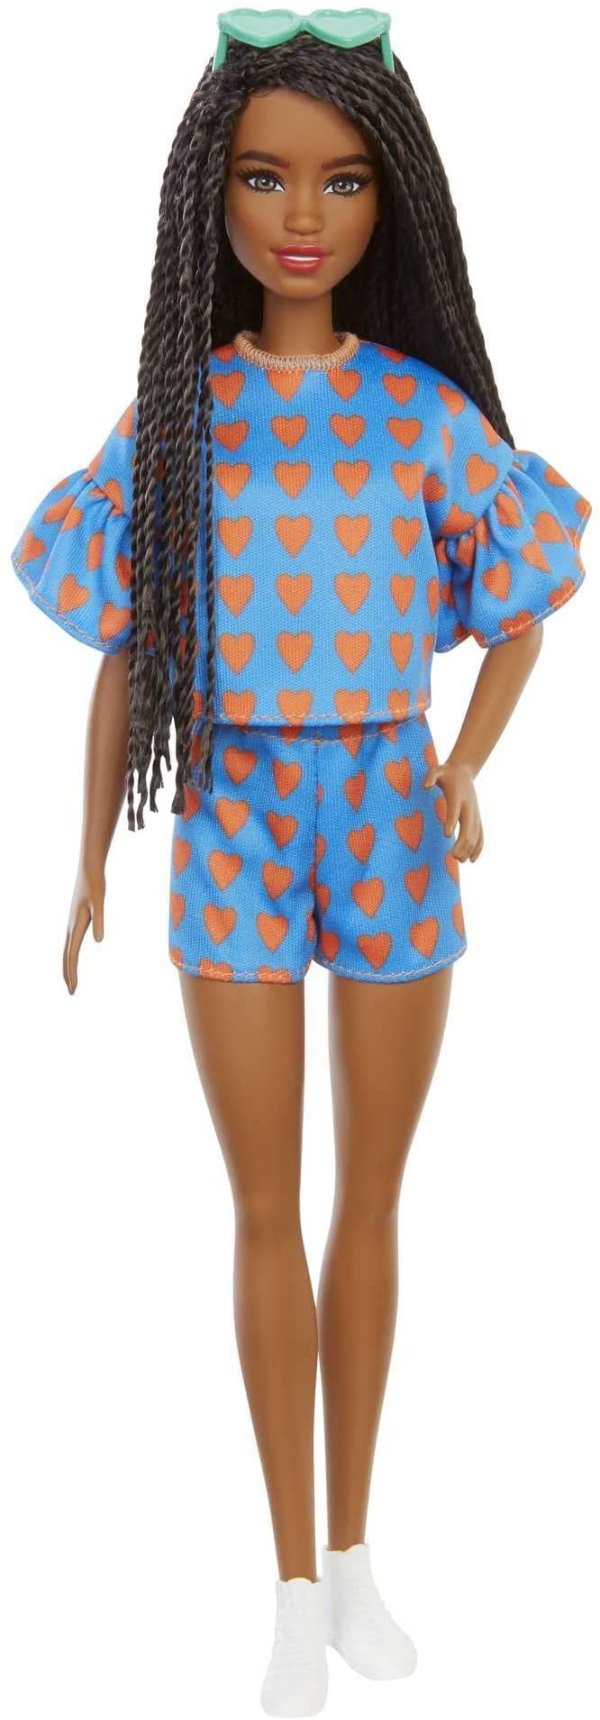 Fashionistas Doll # 172 , Heart Print Matching Top & Shorts & Twisted Hairstyle Toy for Kids 3 to 8 Years Old